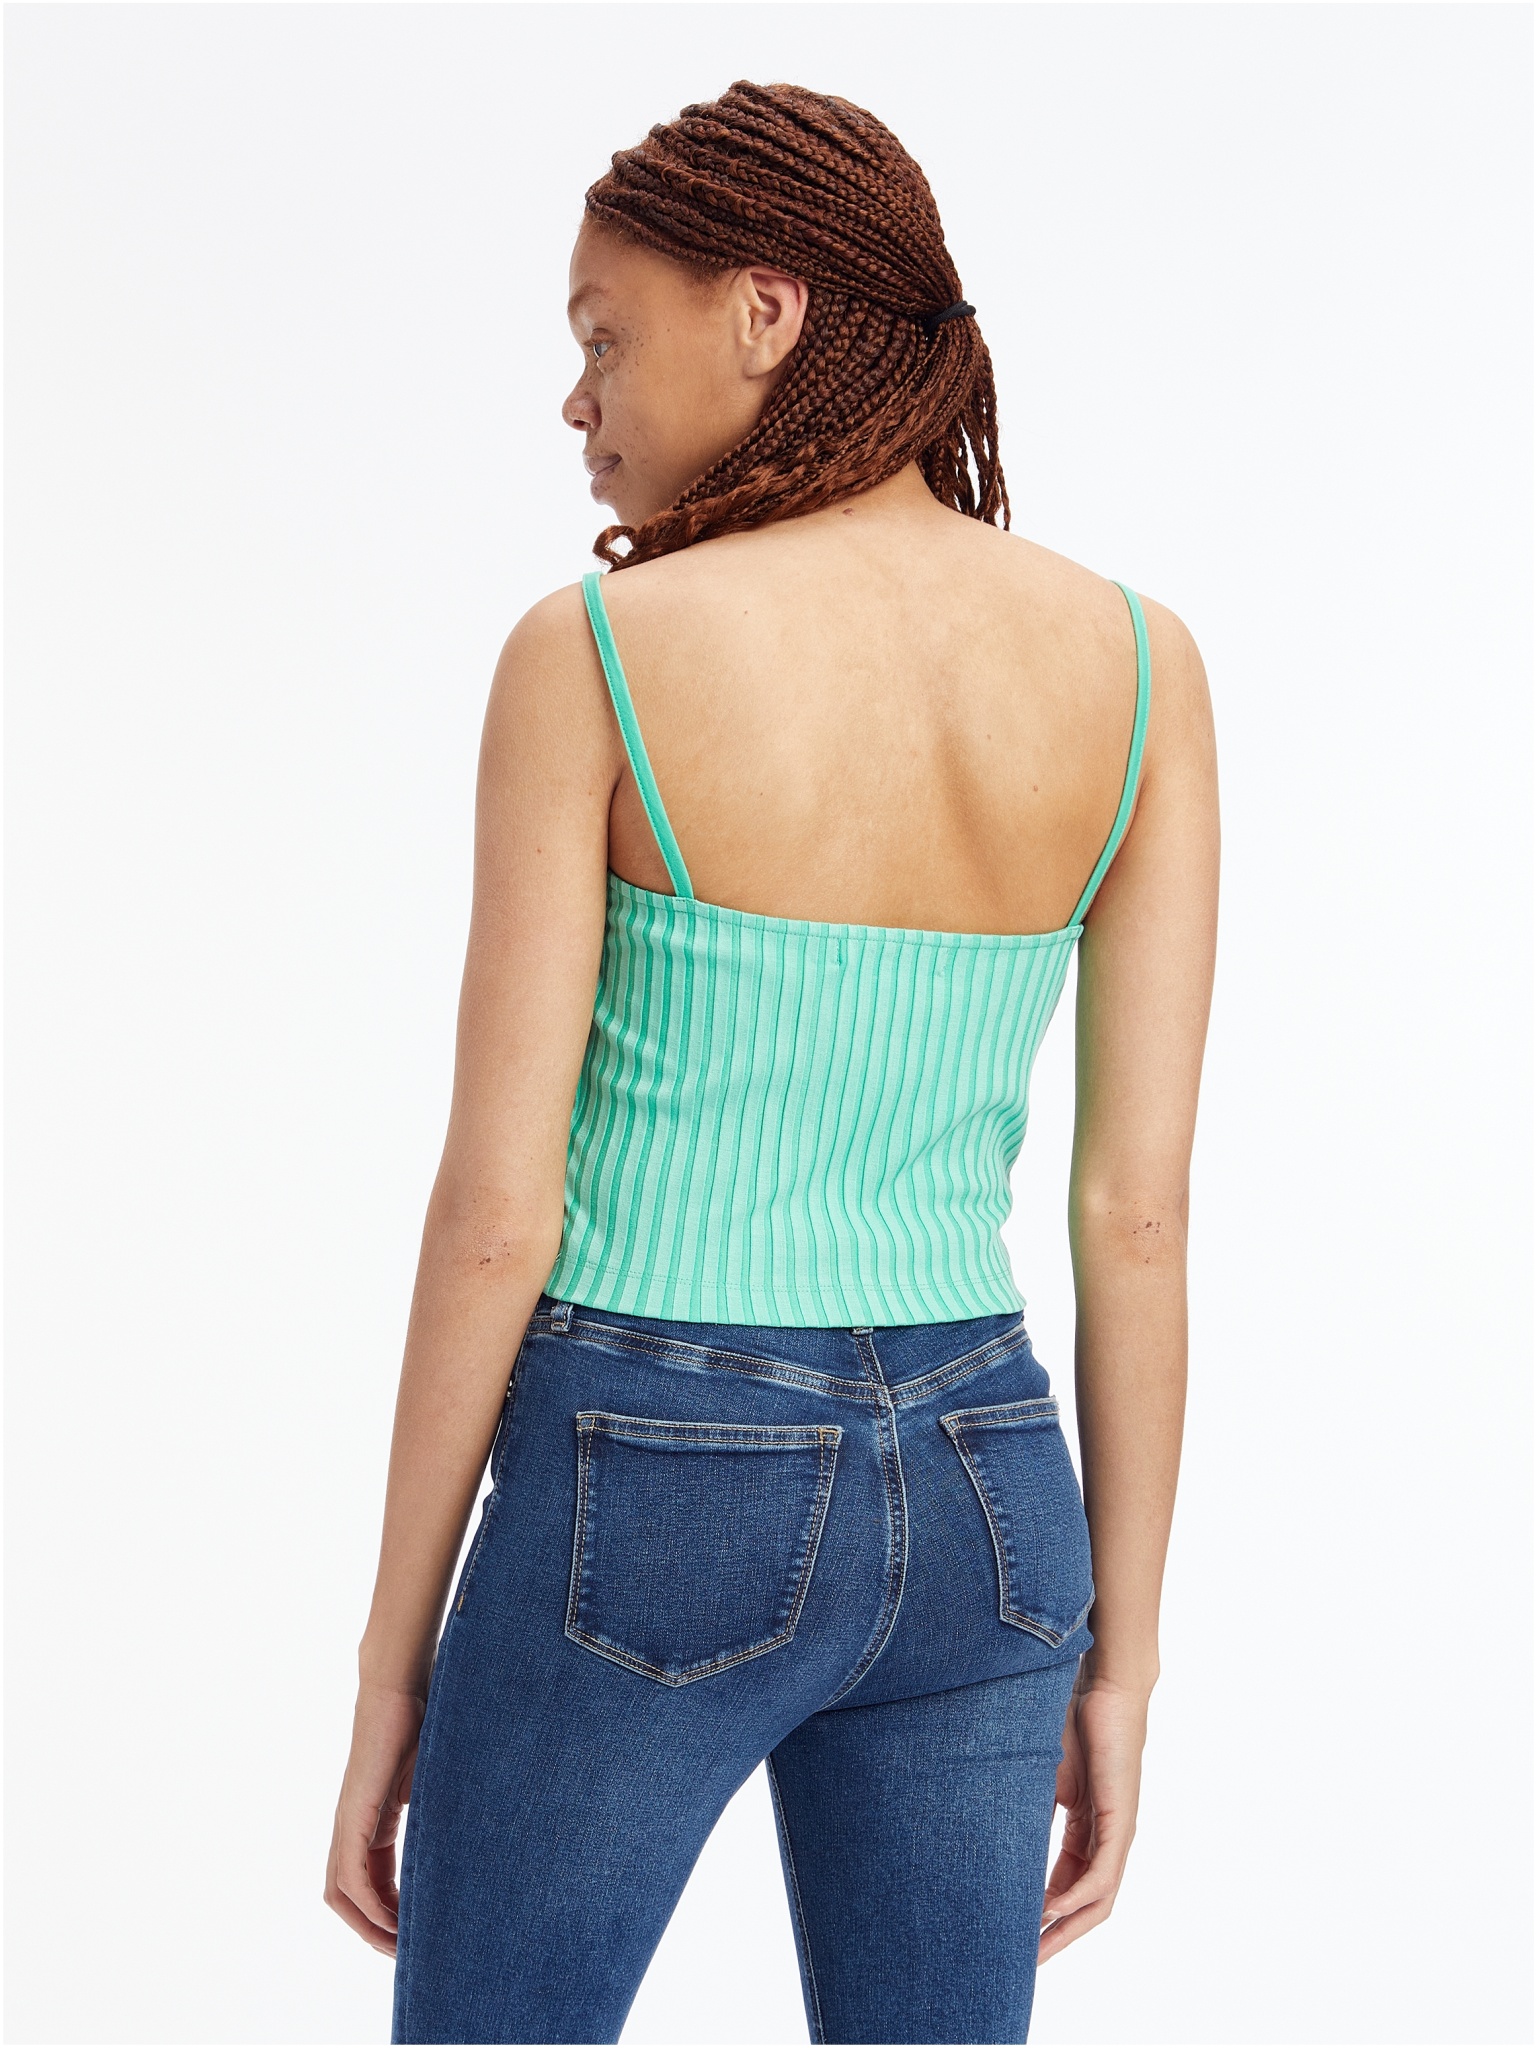 CALVIN KLEIN JEANS RIB CROPPED STRAPPY TOP 10683576